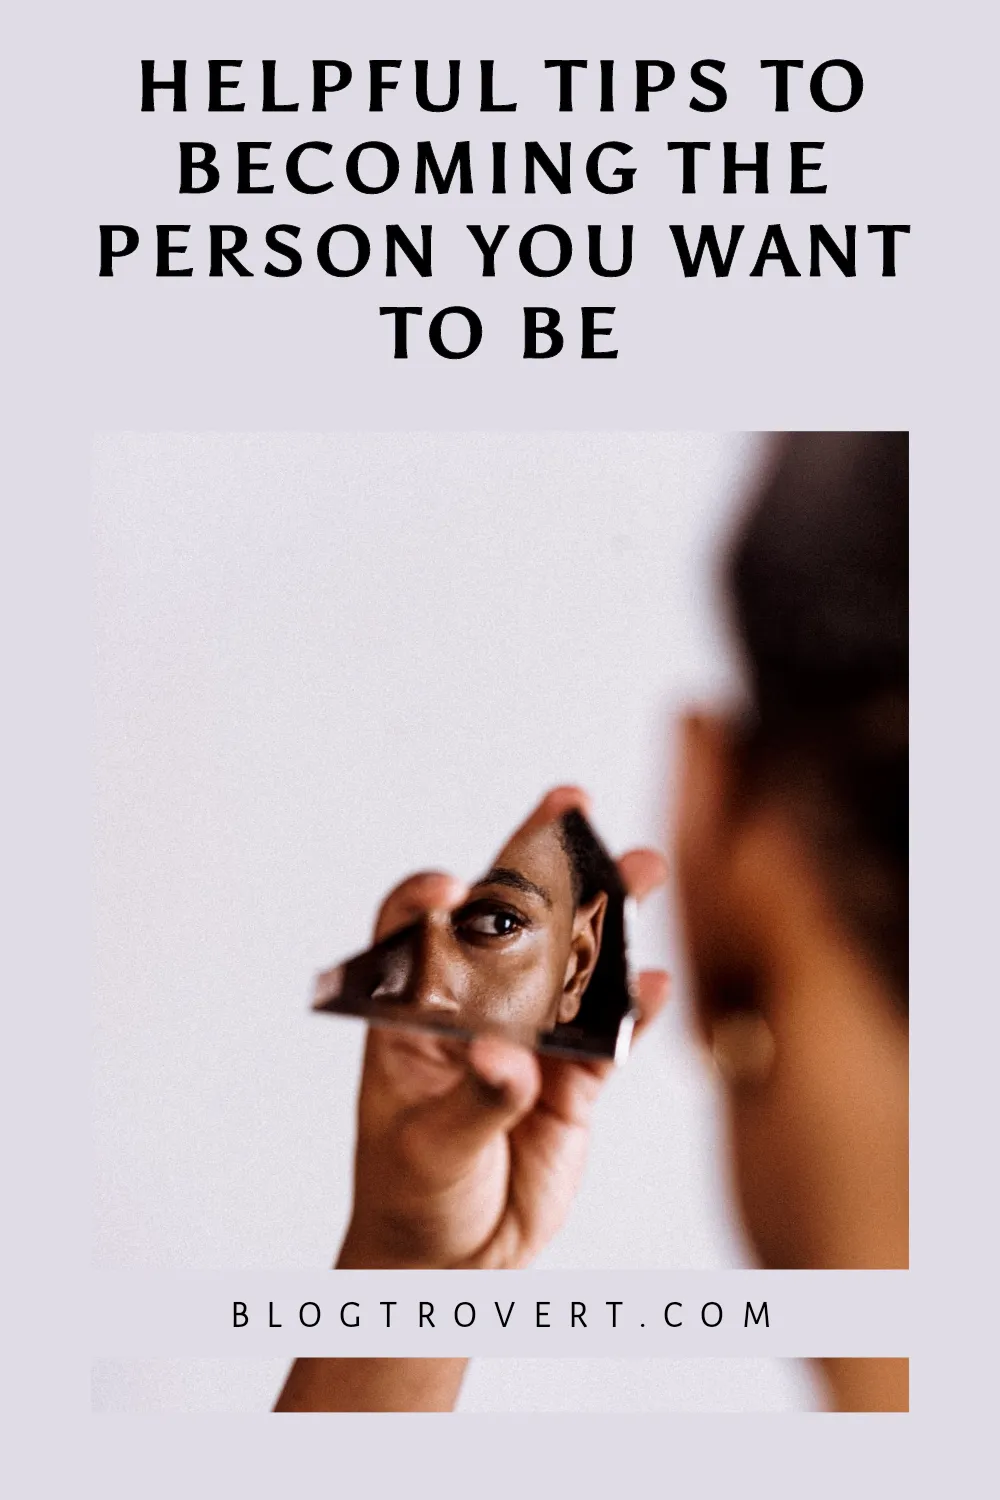 How to become the person you want to be - 17 helpful tips 9